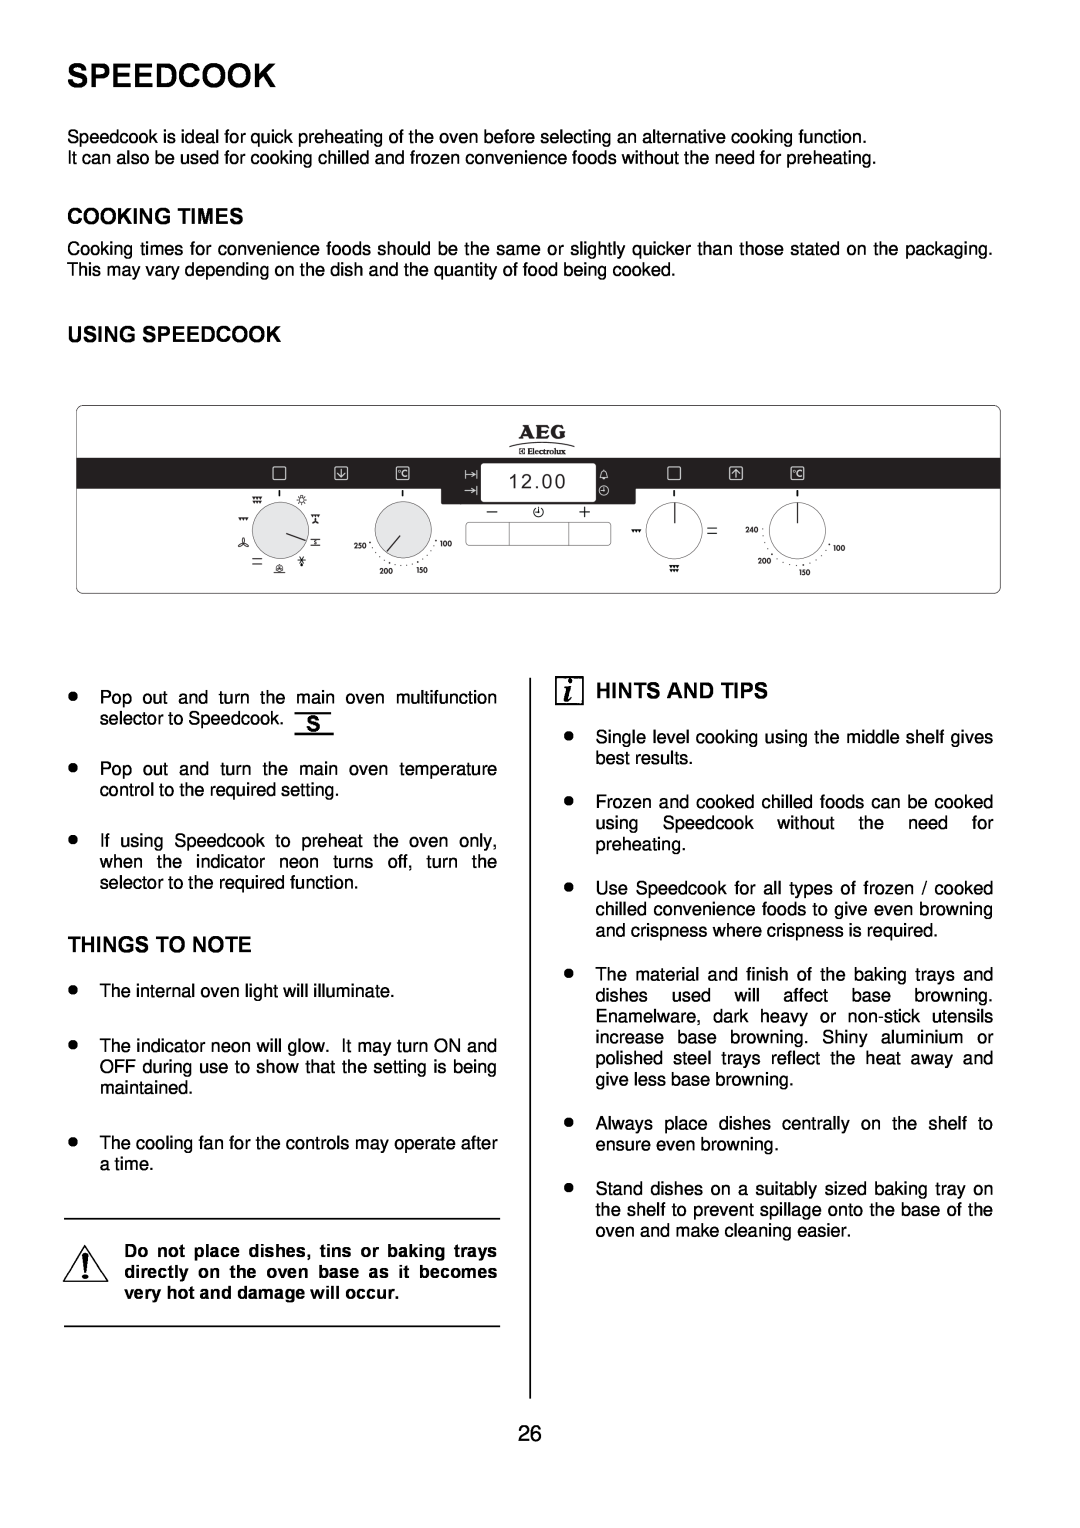 Electrolux D4101-5 manual Cooking Times, Using Speedcook, Things To Note, Hints And Tips, 1 2 . 0 